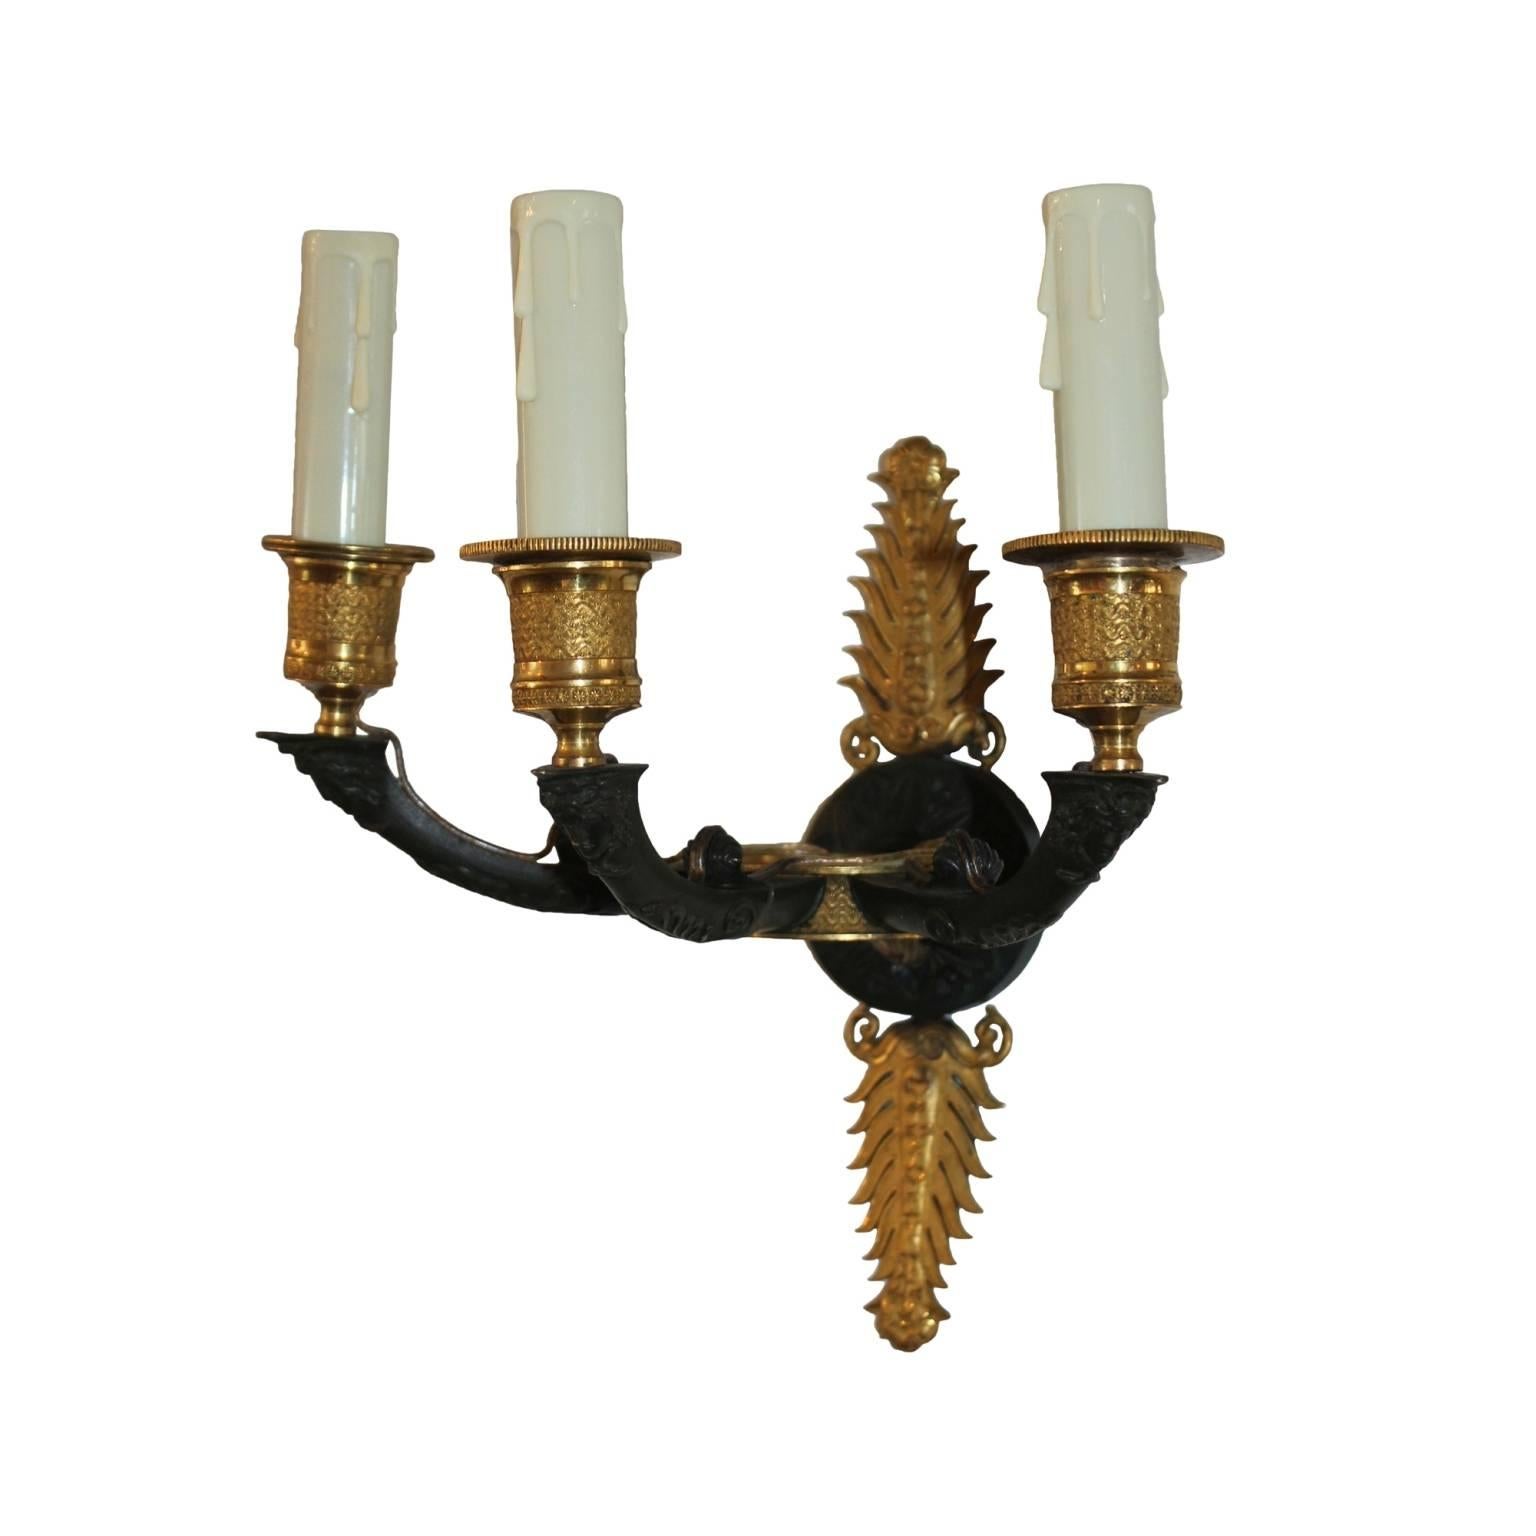 Dark verde antico bronze sconces with bronze doré anthemion ormolus. Each with three arms decorated with an acanthus leaf and a face of a young Frenchman with aquline nose, long curls and a neckerchief (depiction of young Bonaparte?) supporting